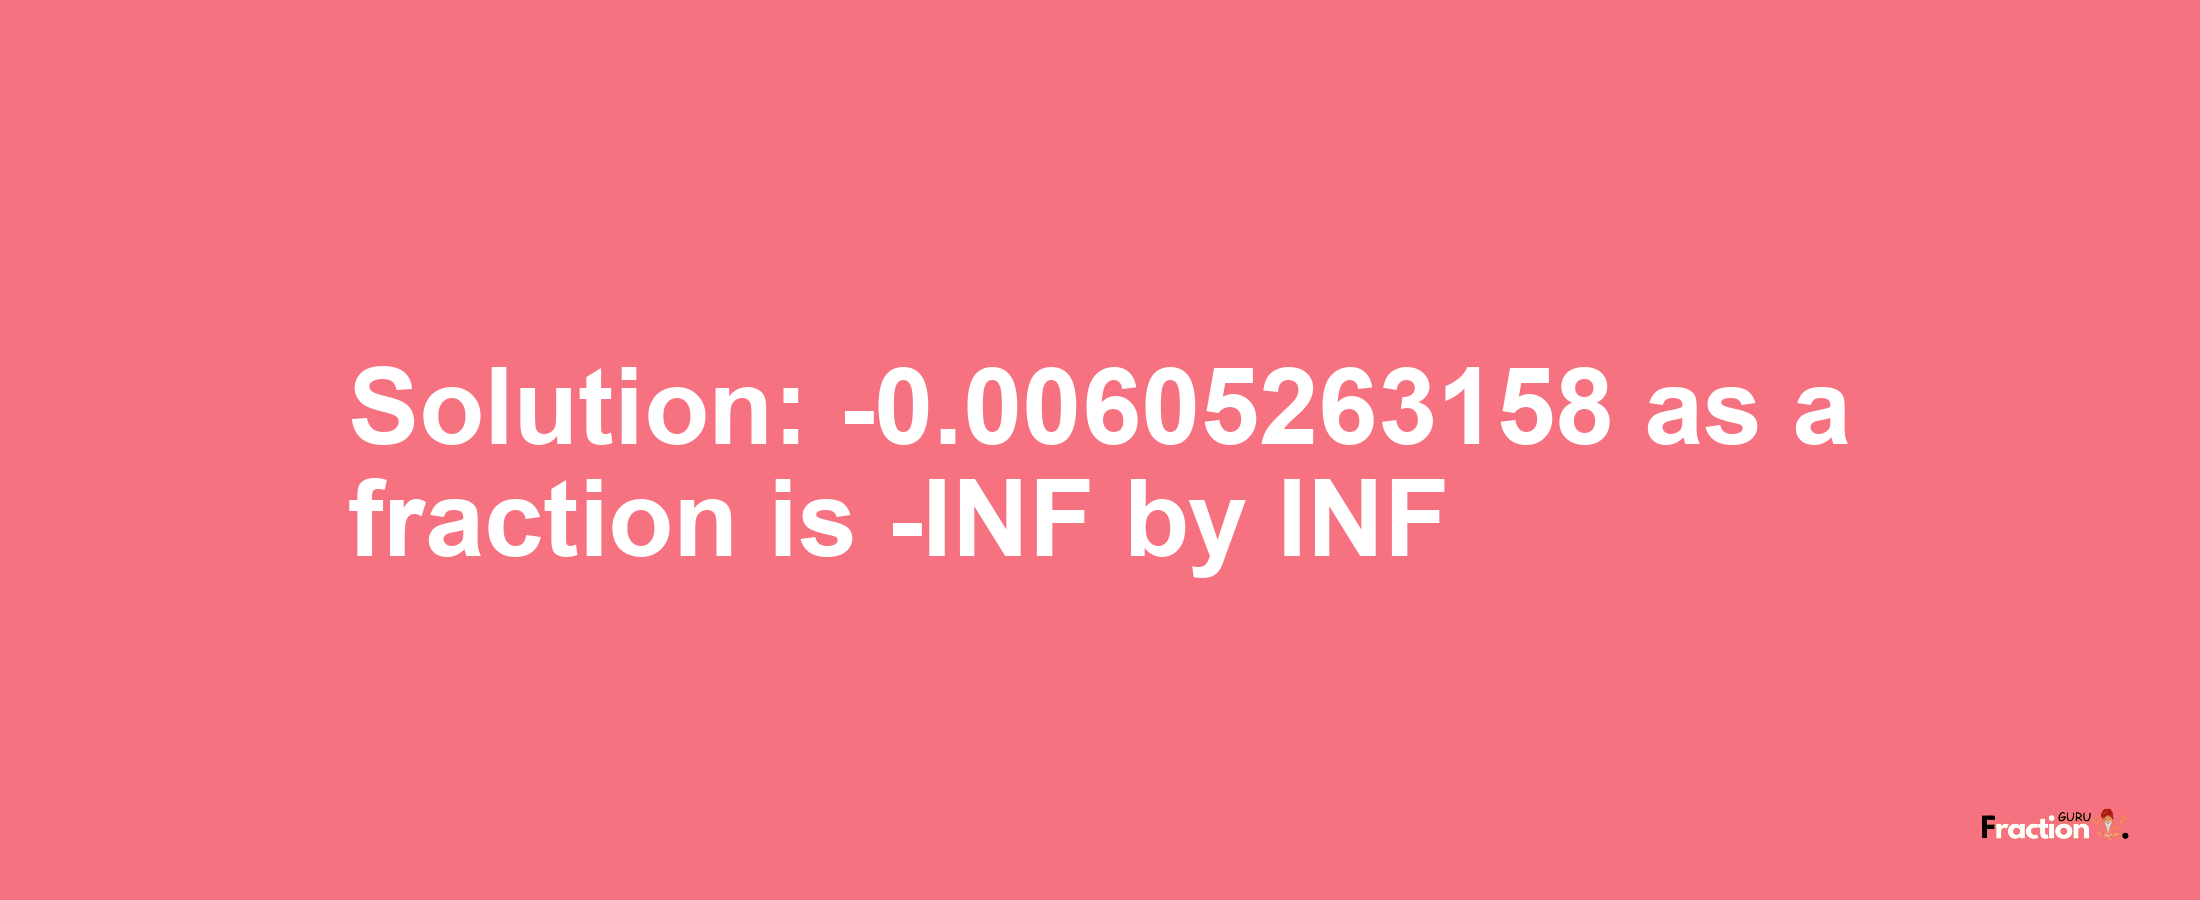 Solution:-0.00605263158 as a fraction is -INF/INF